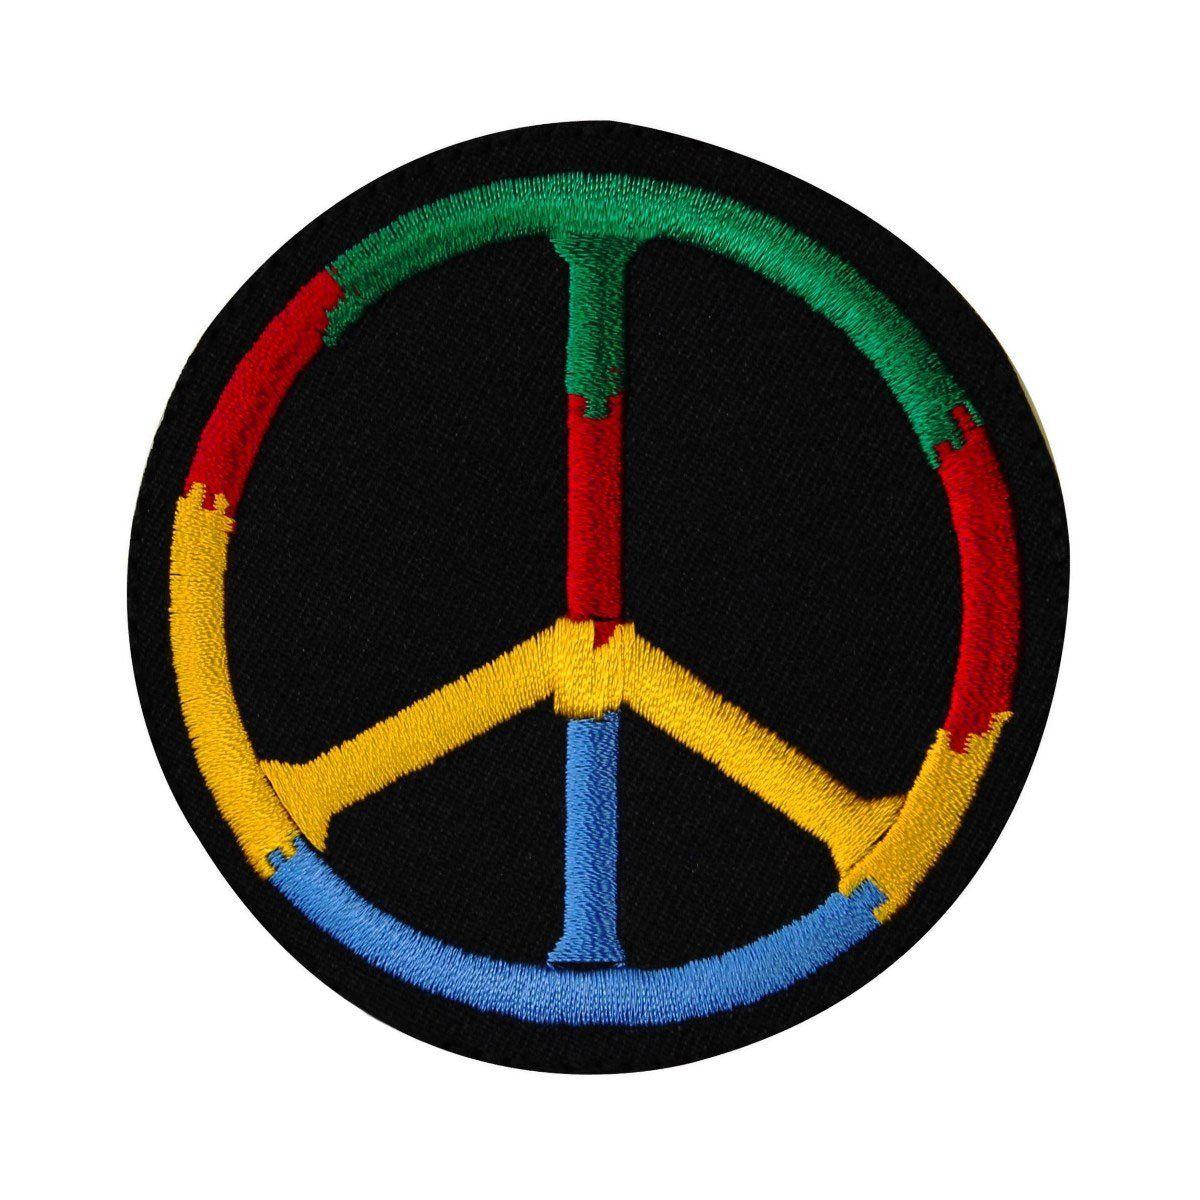 Hippie Peace Sign Logo - Amazon.com : Hippie Peace Symbol Sign Logo Embroidered Iron On Patch